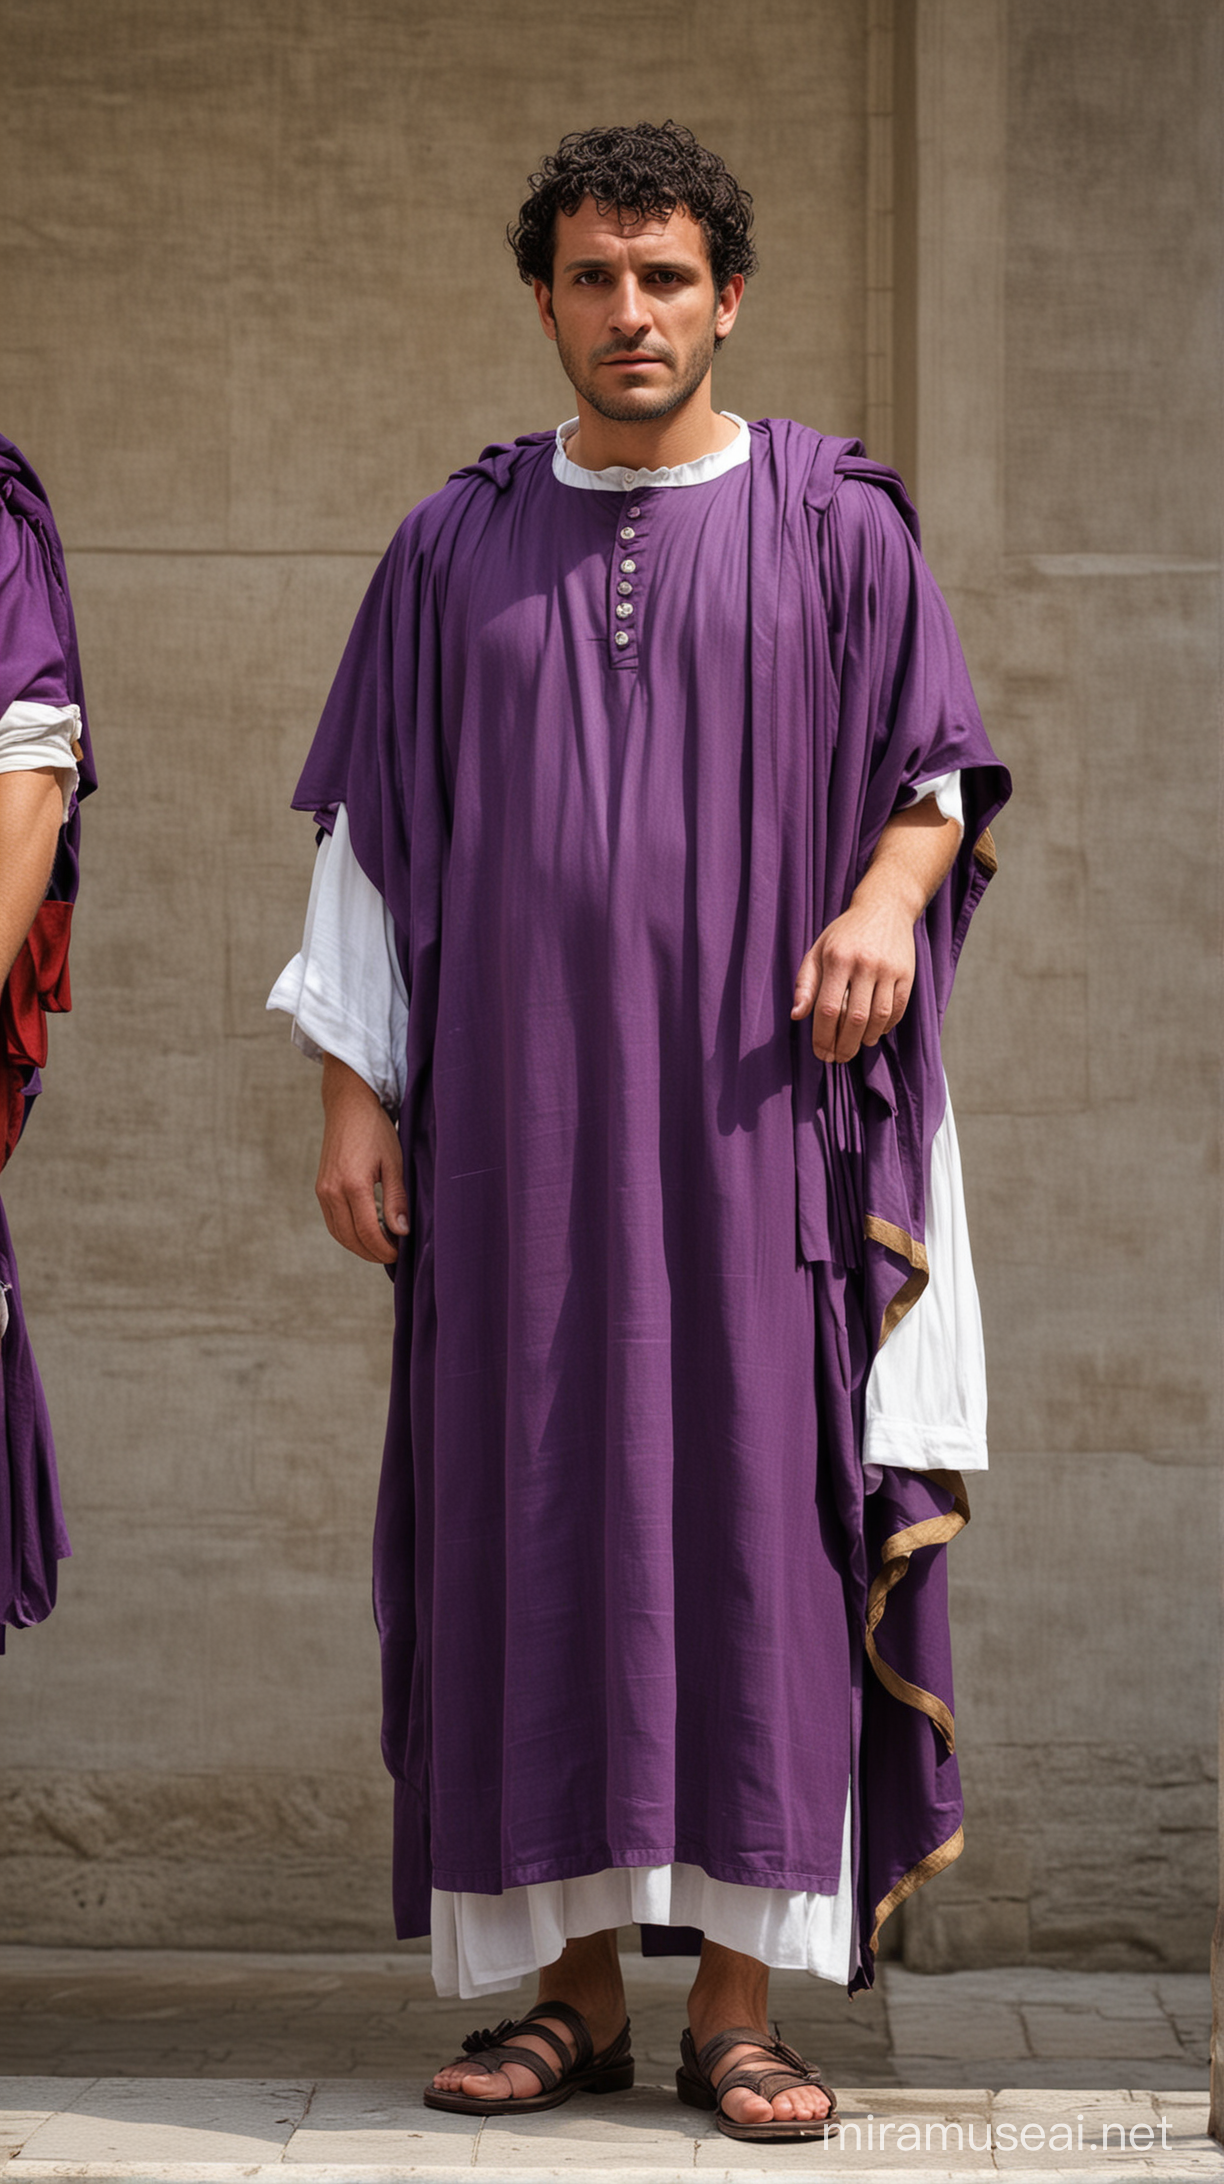 Show a Roman official or magistrate issuing a decree against the wearing of purple clothing by commoners.